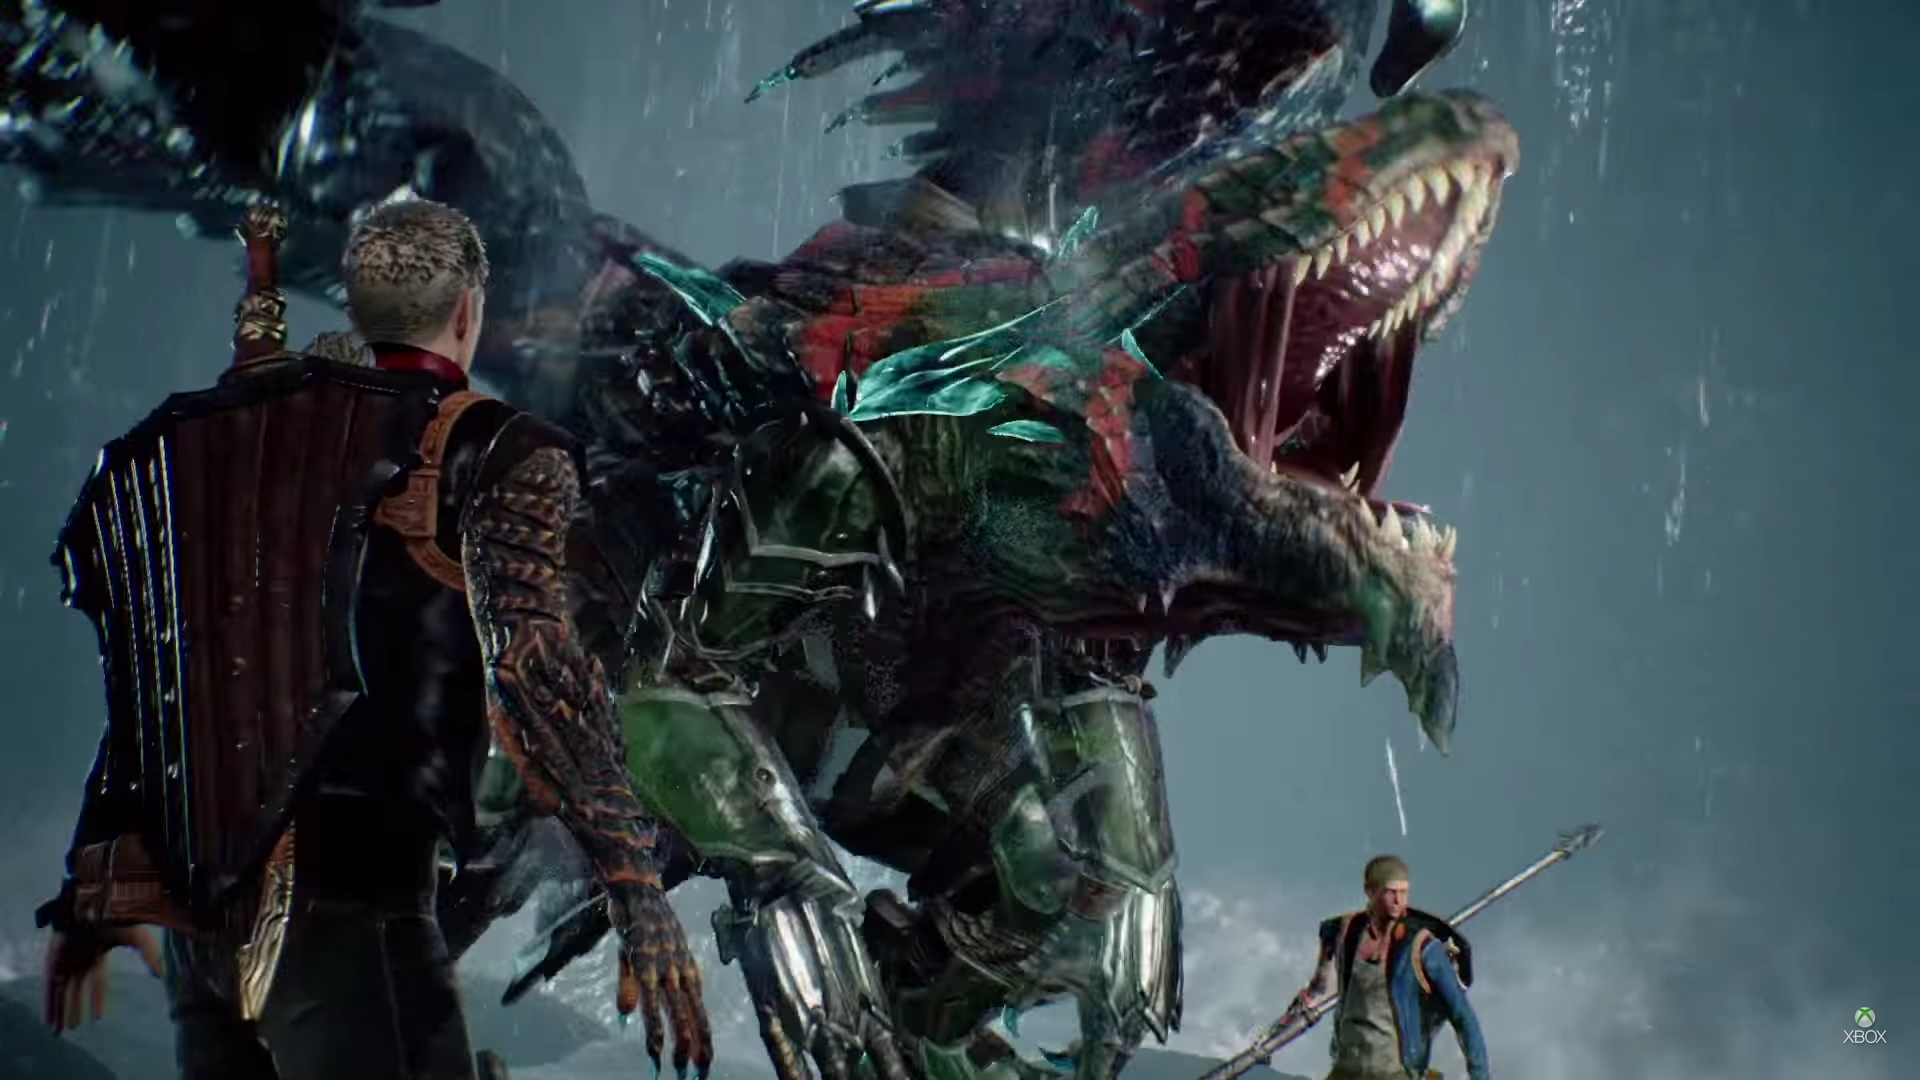 Image for Scalebound's massive boss fights headed to Xbox One and Windows 10